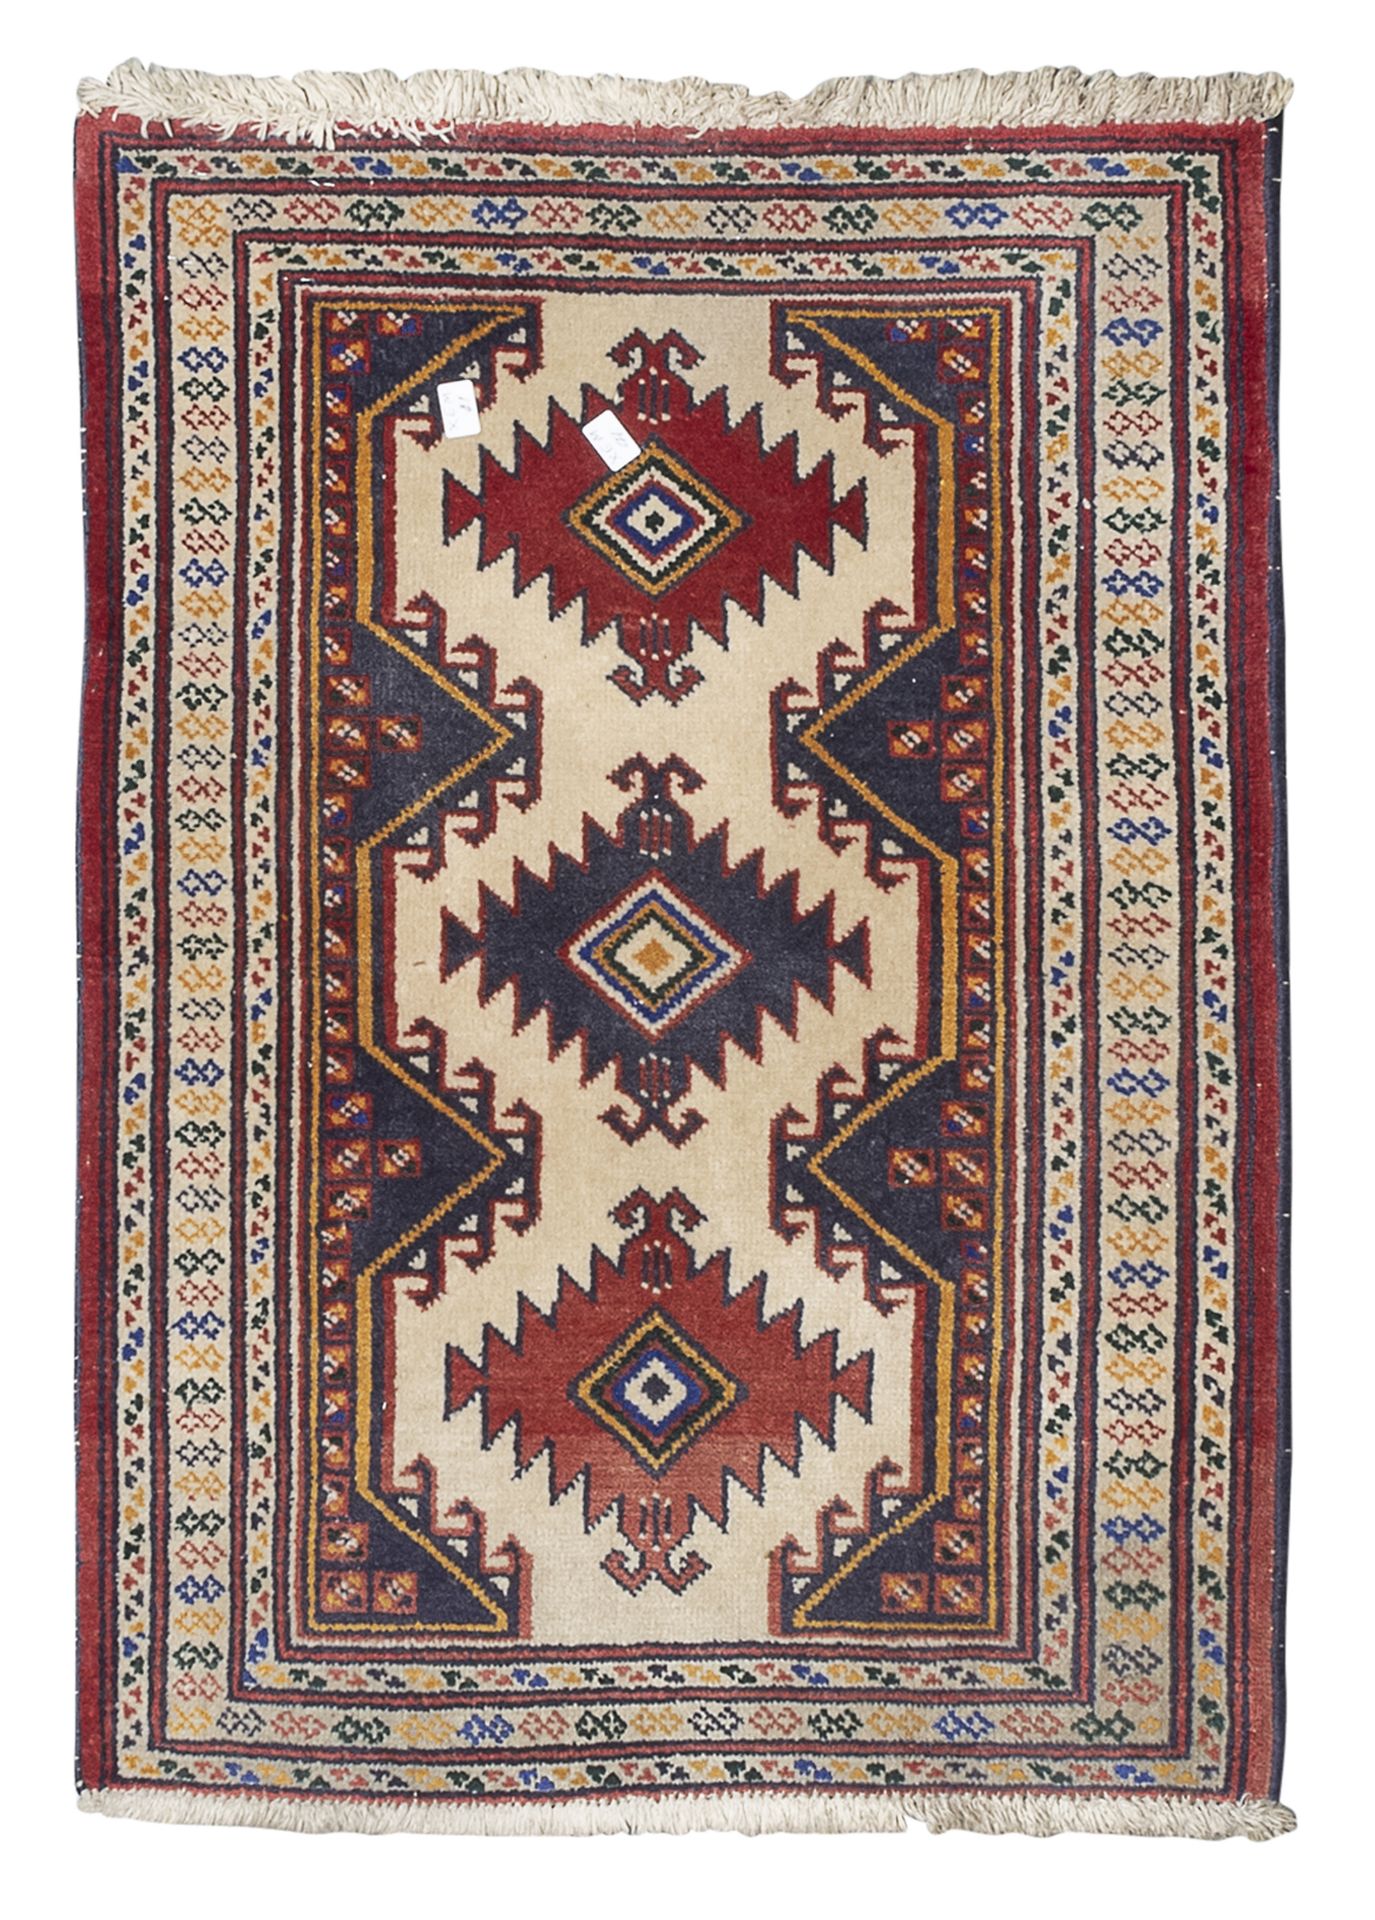 SMALL ANTIQUE MALAYER CARPET EARLY 20TH CENTURY